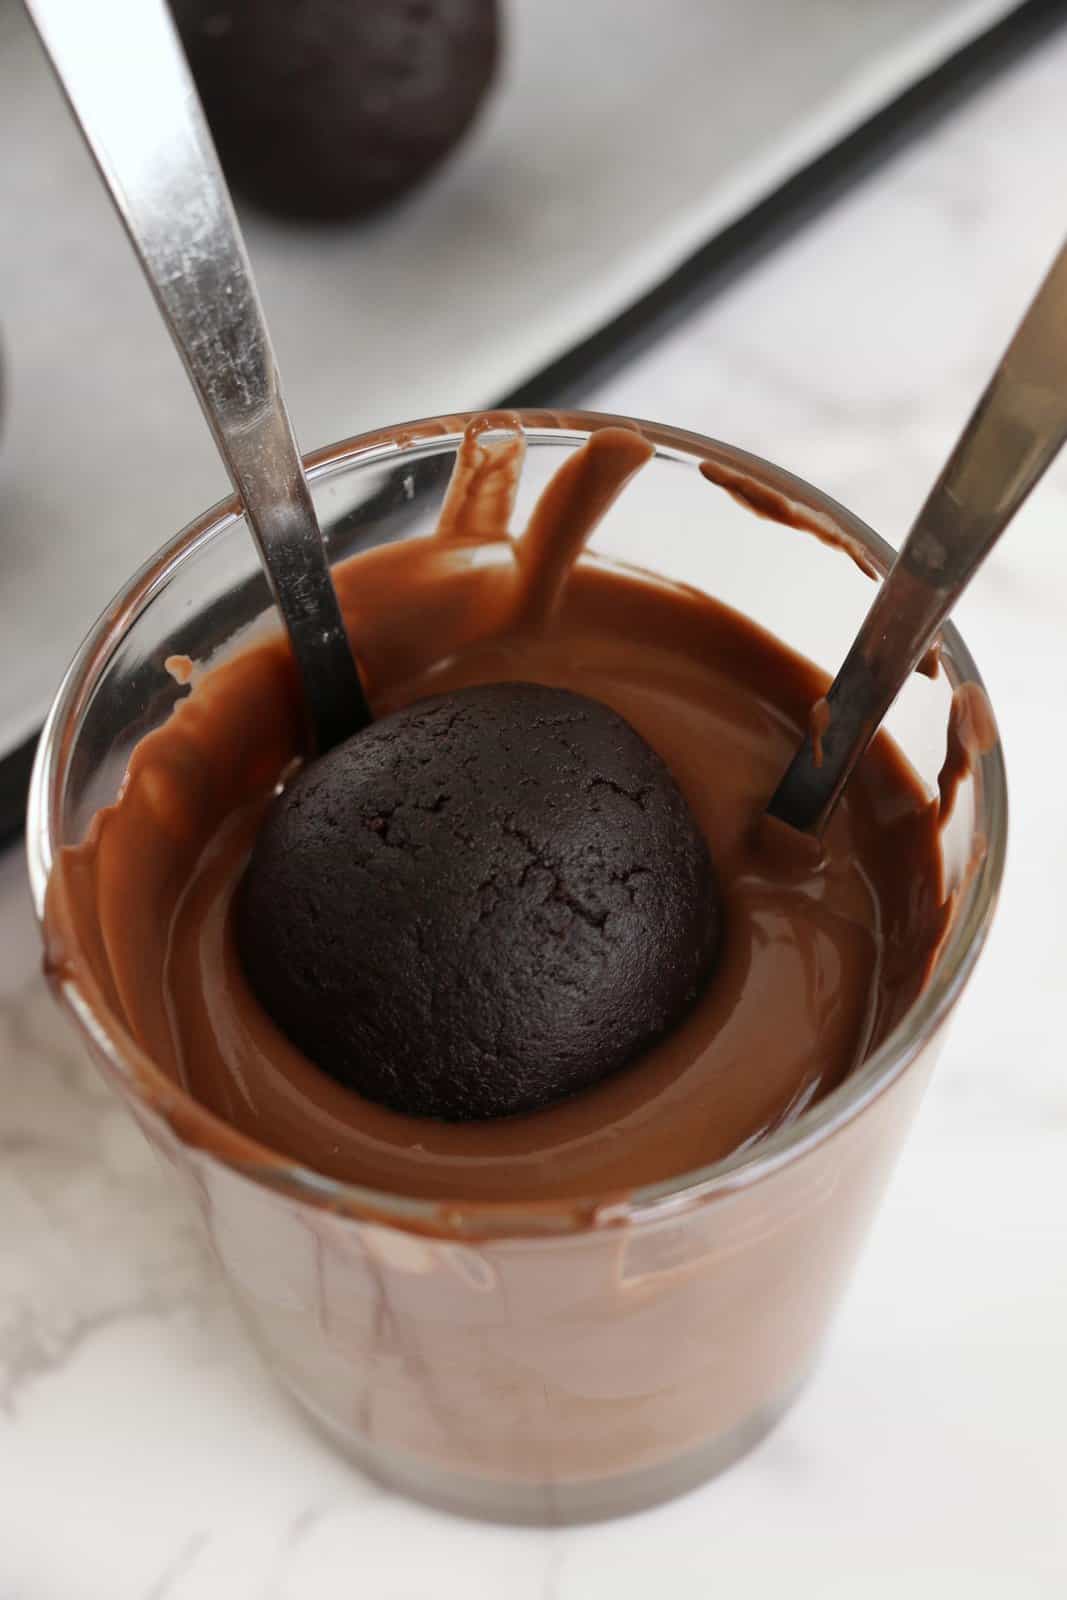 Melted chocolate in glass with cake ball being dipped into it.